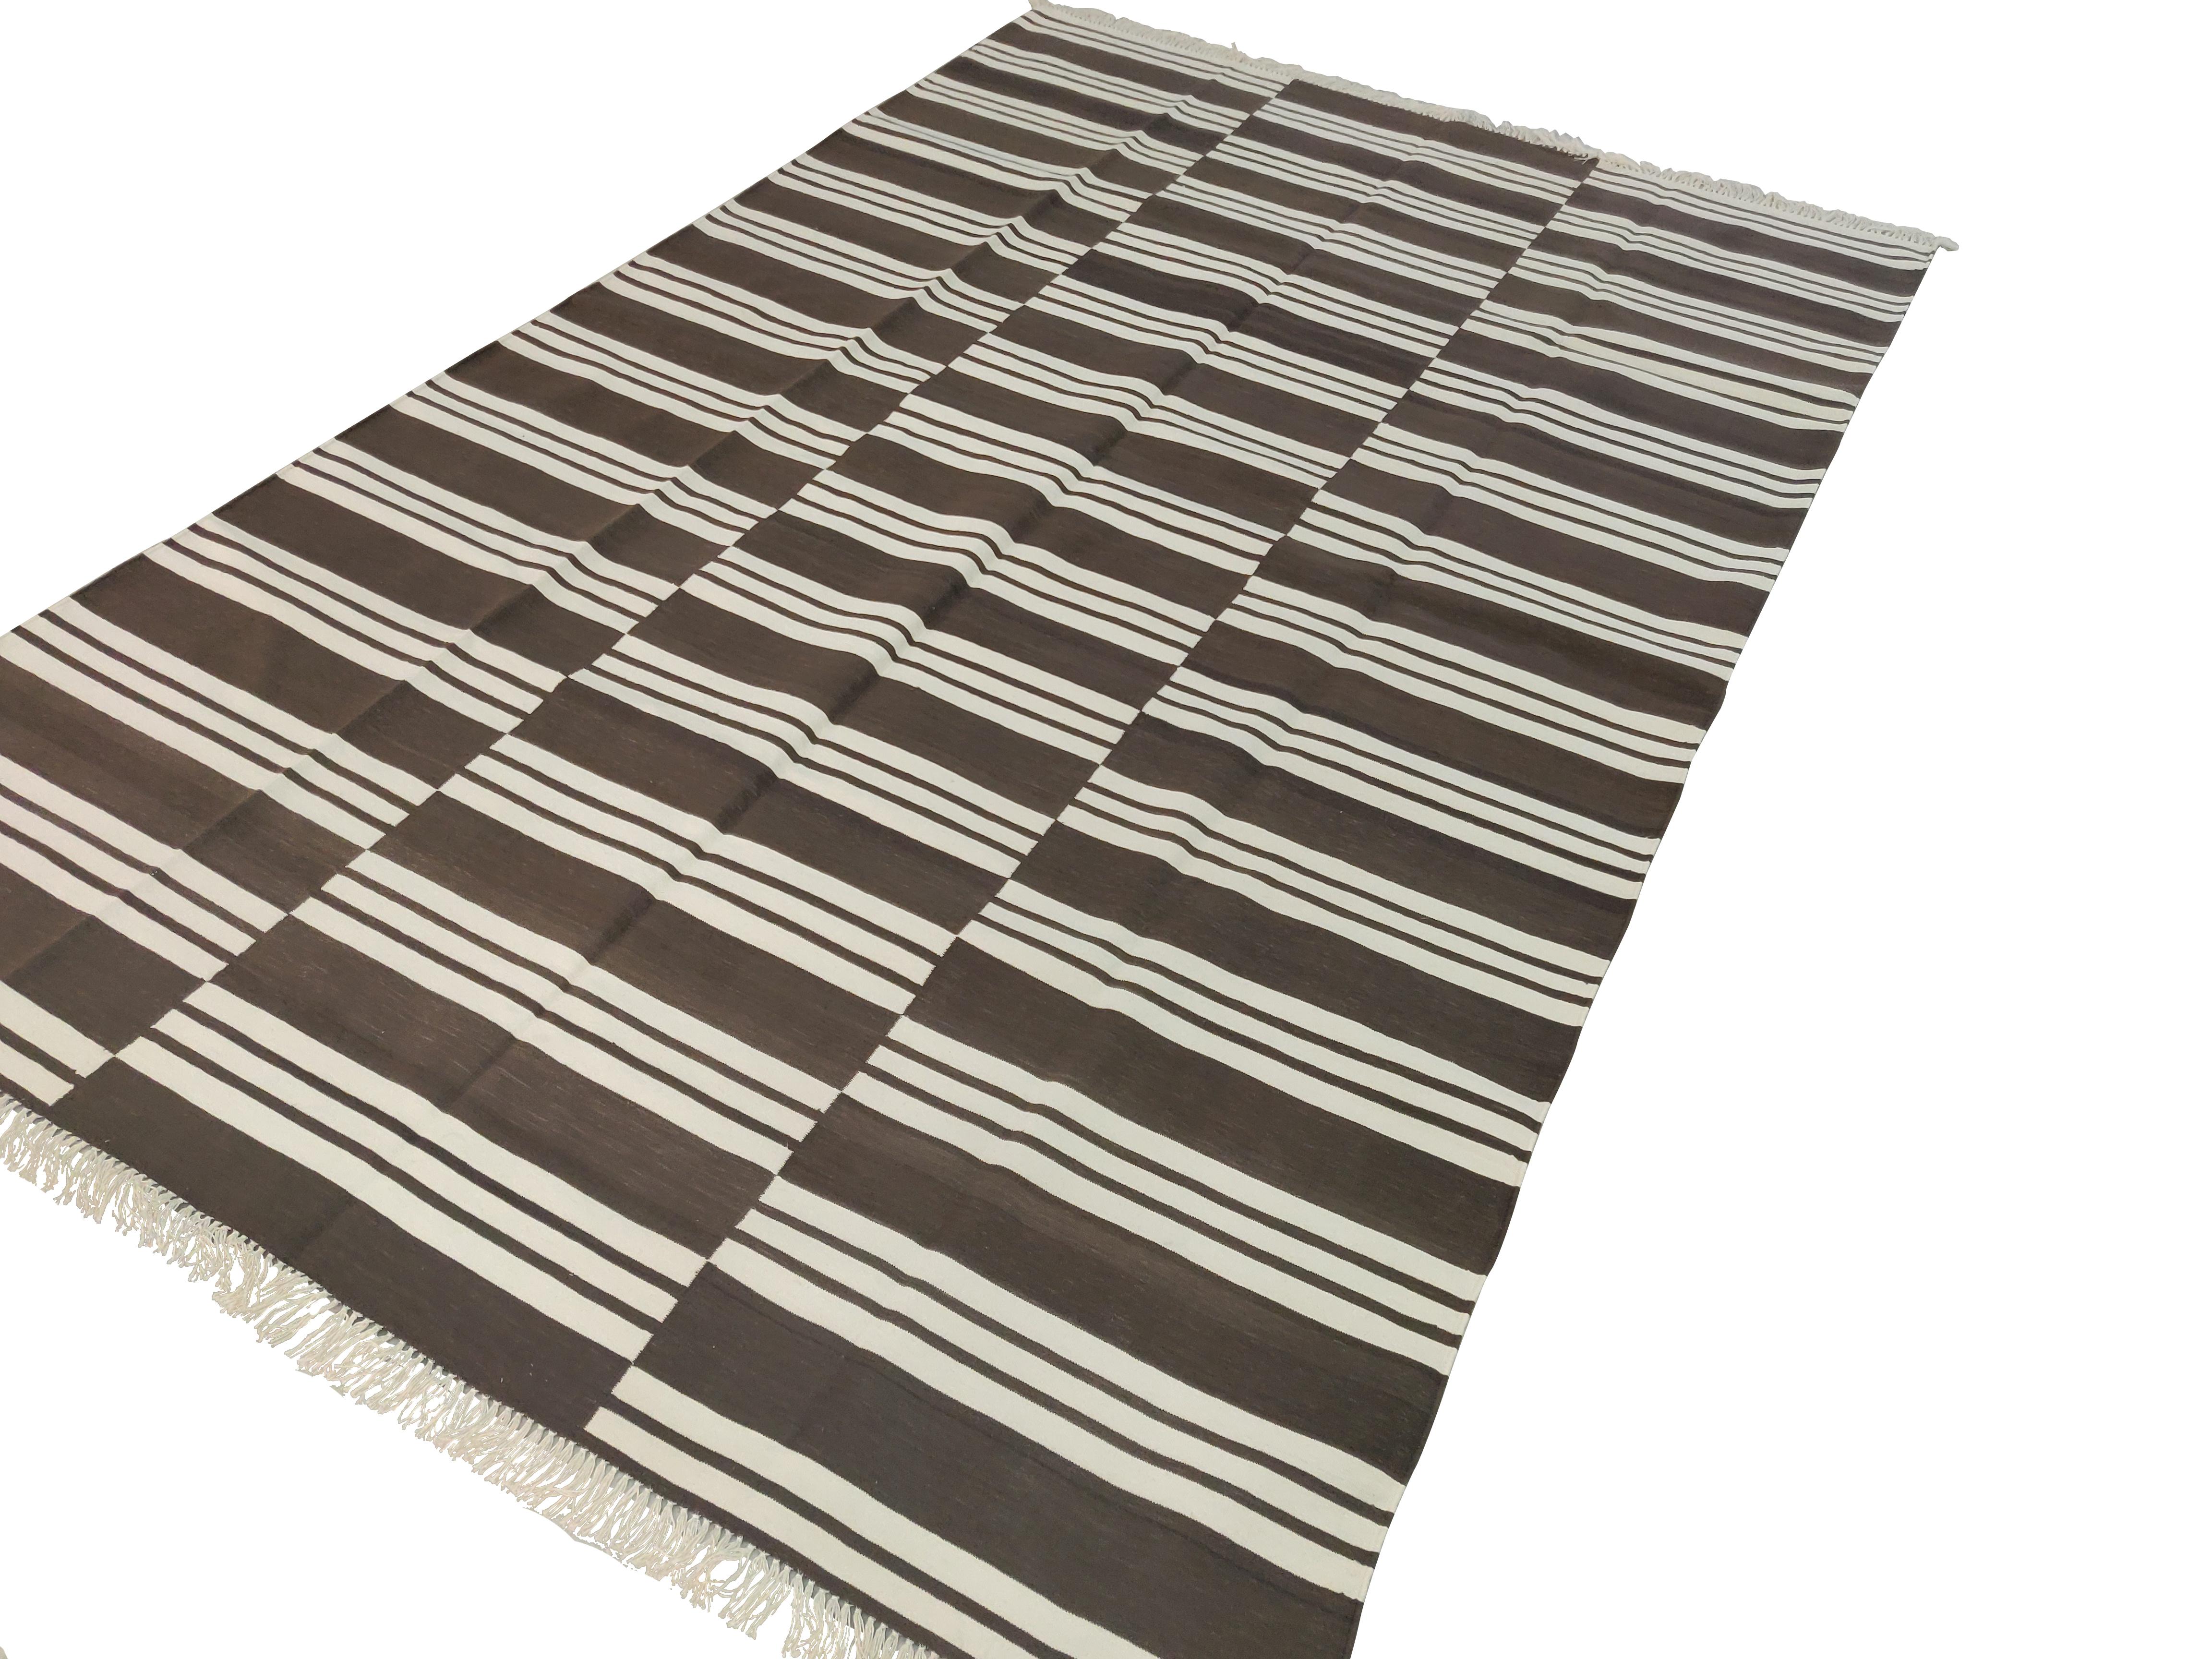 Cotton Natural Vegetable Dyed, Brown And White Striped Indian Rug - 6'x9'
These special flat-weave dhurries are hand-woven with 15 ply 100% cotton yarn. Due to the special manufacturing techniques used to create our rugs, the size and color of each